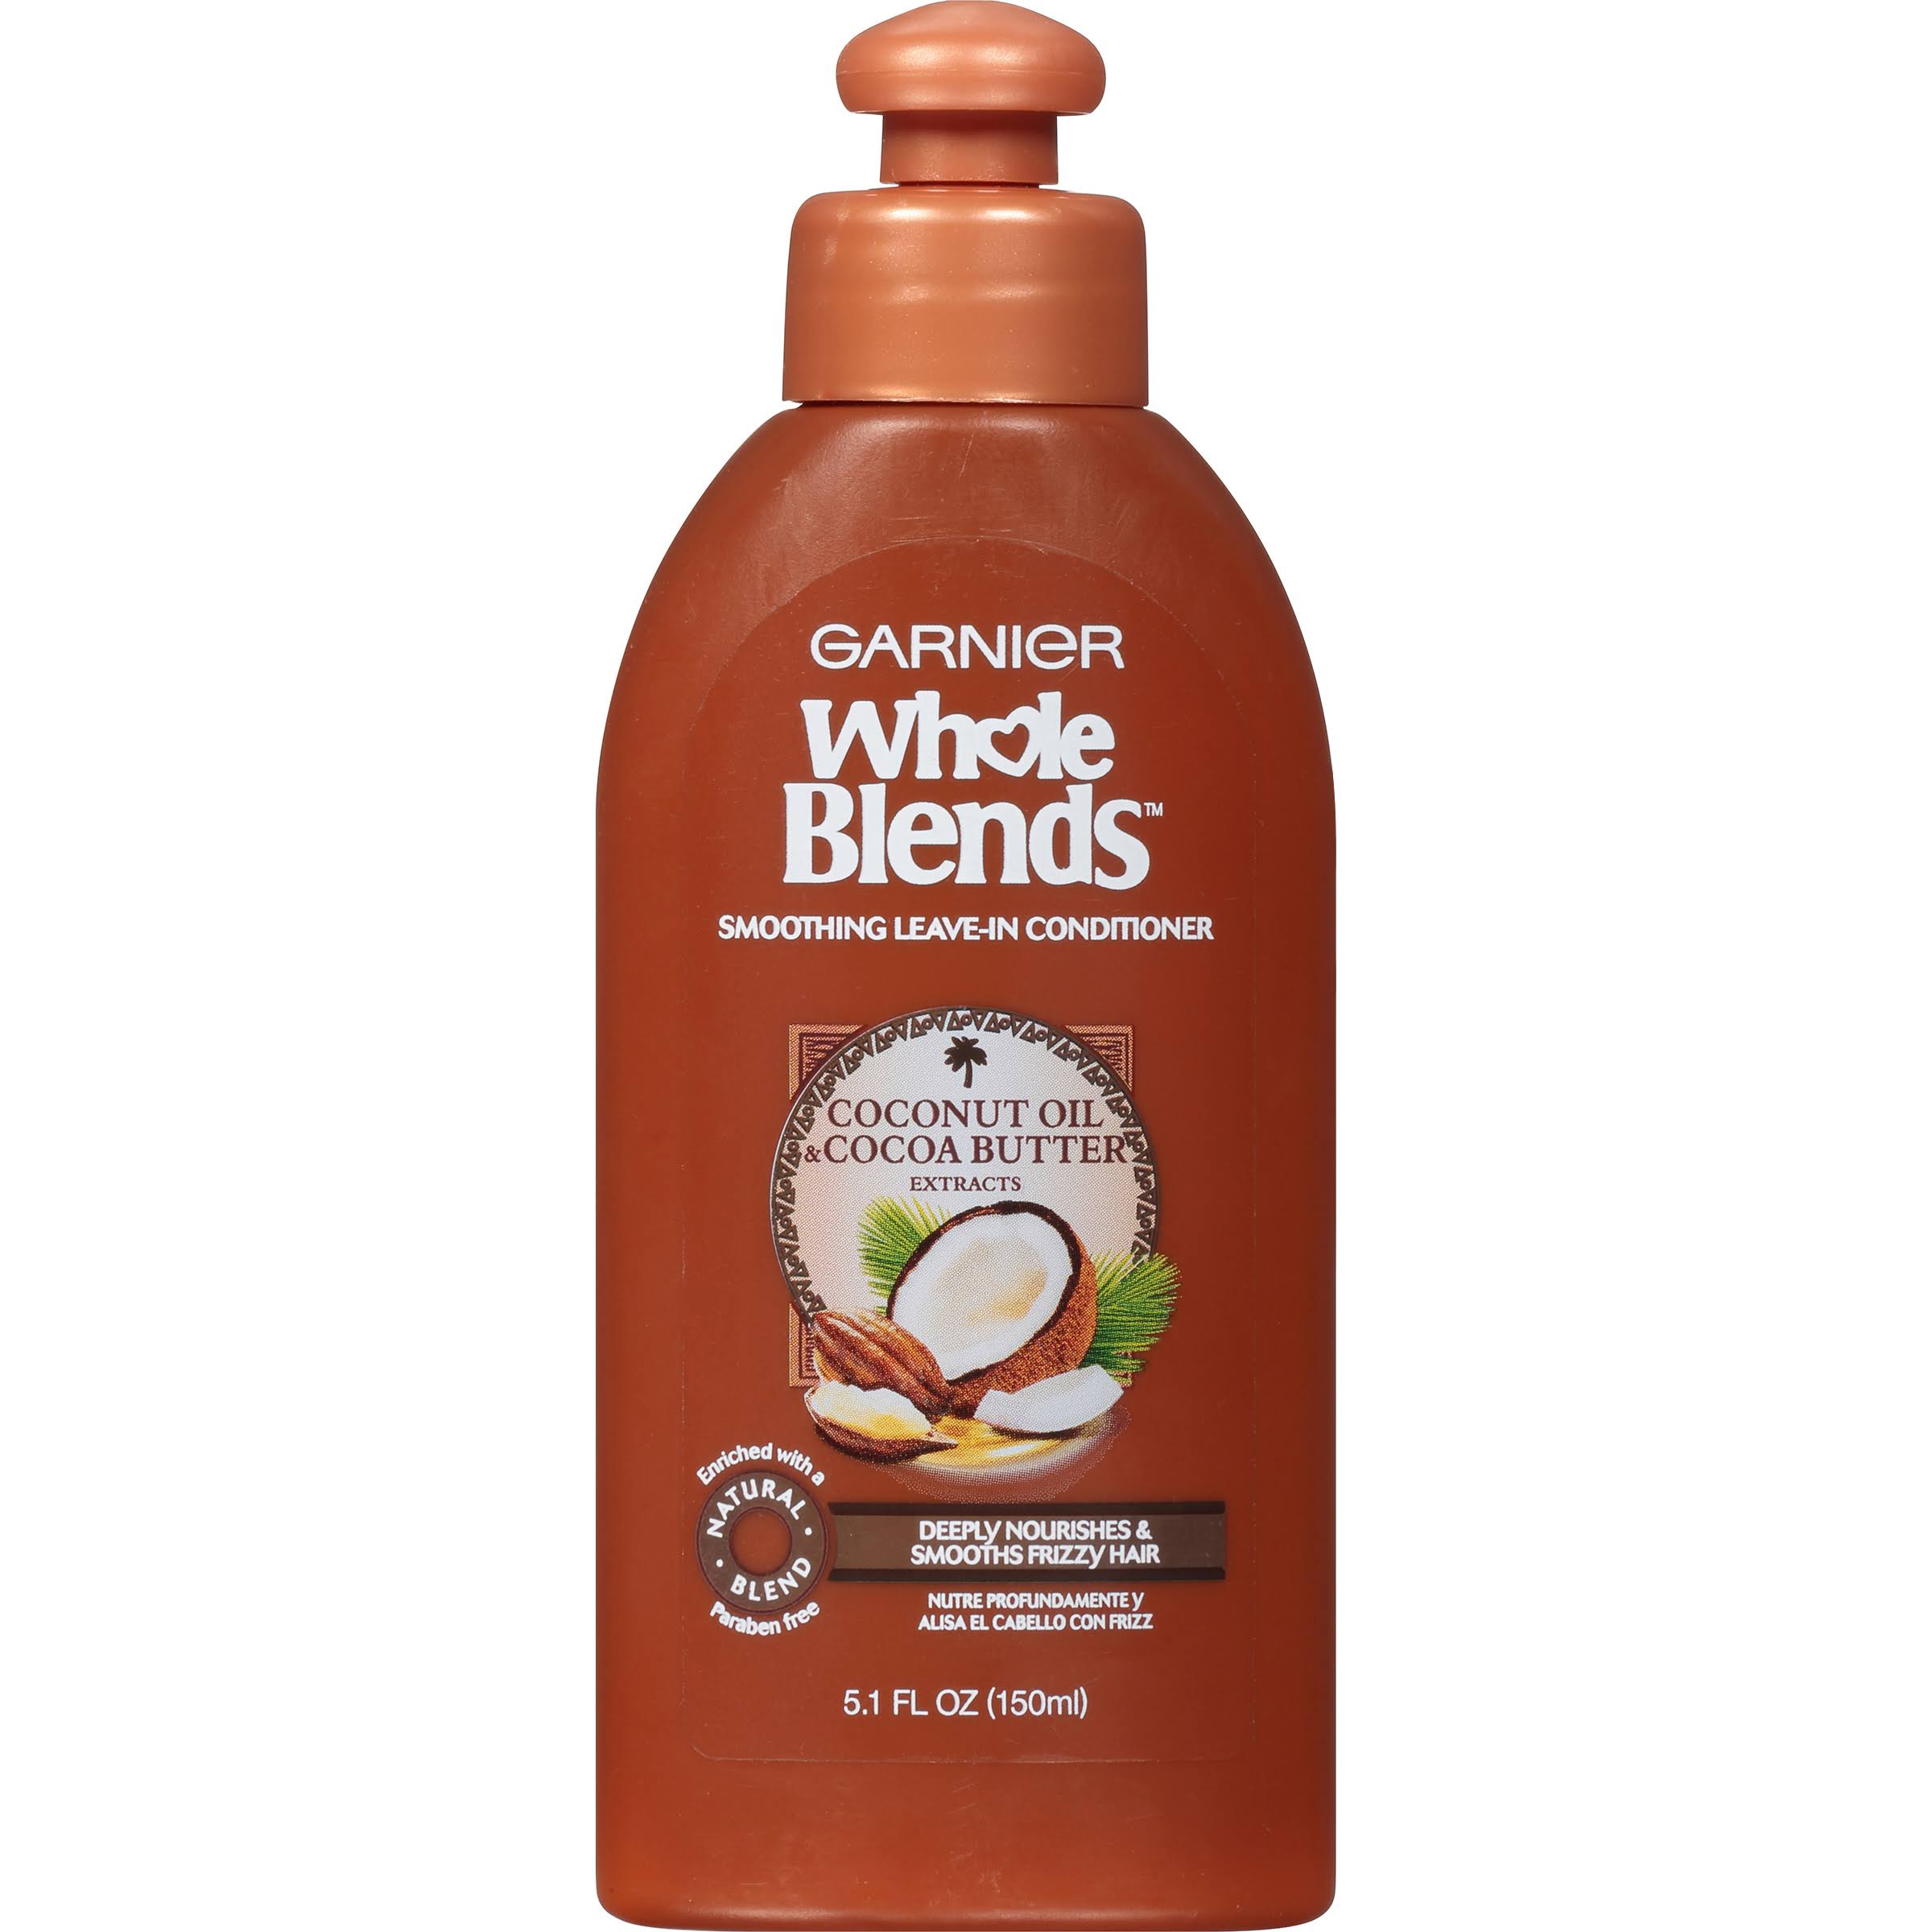 Garnier Whole Blends Coconut Oil & Cocoa Butter Smoothing Leave-In Conditioner - 5.1 fl oz